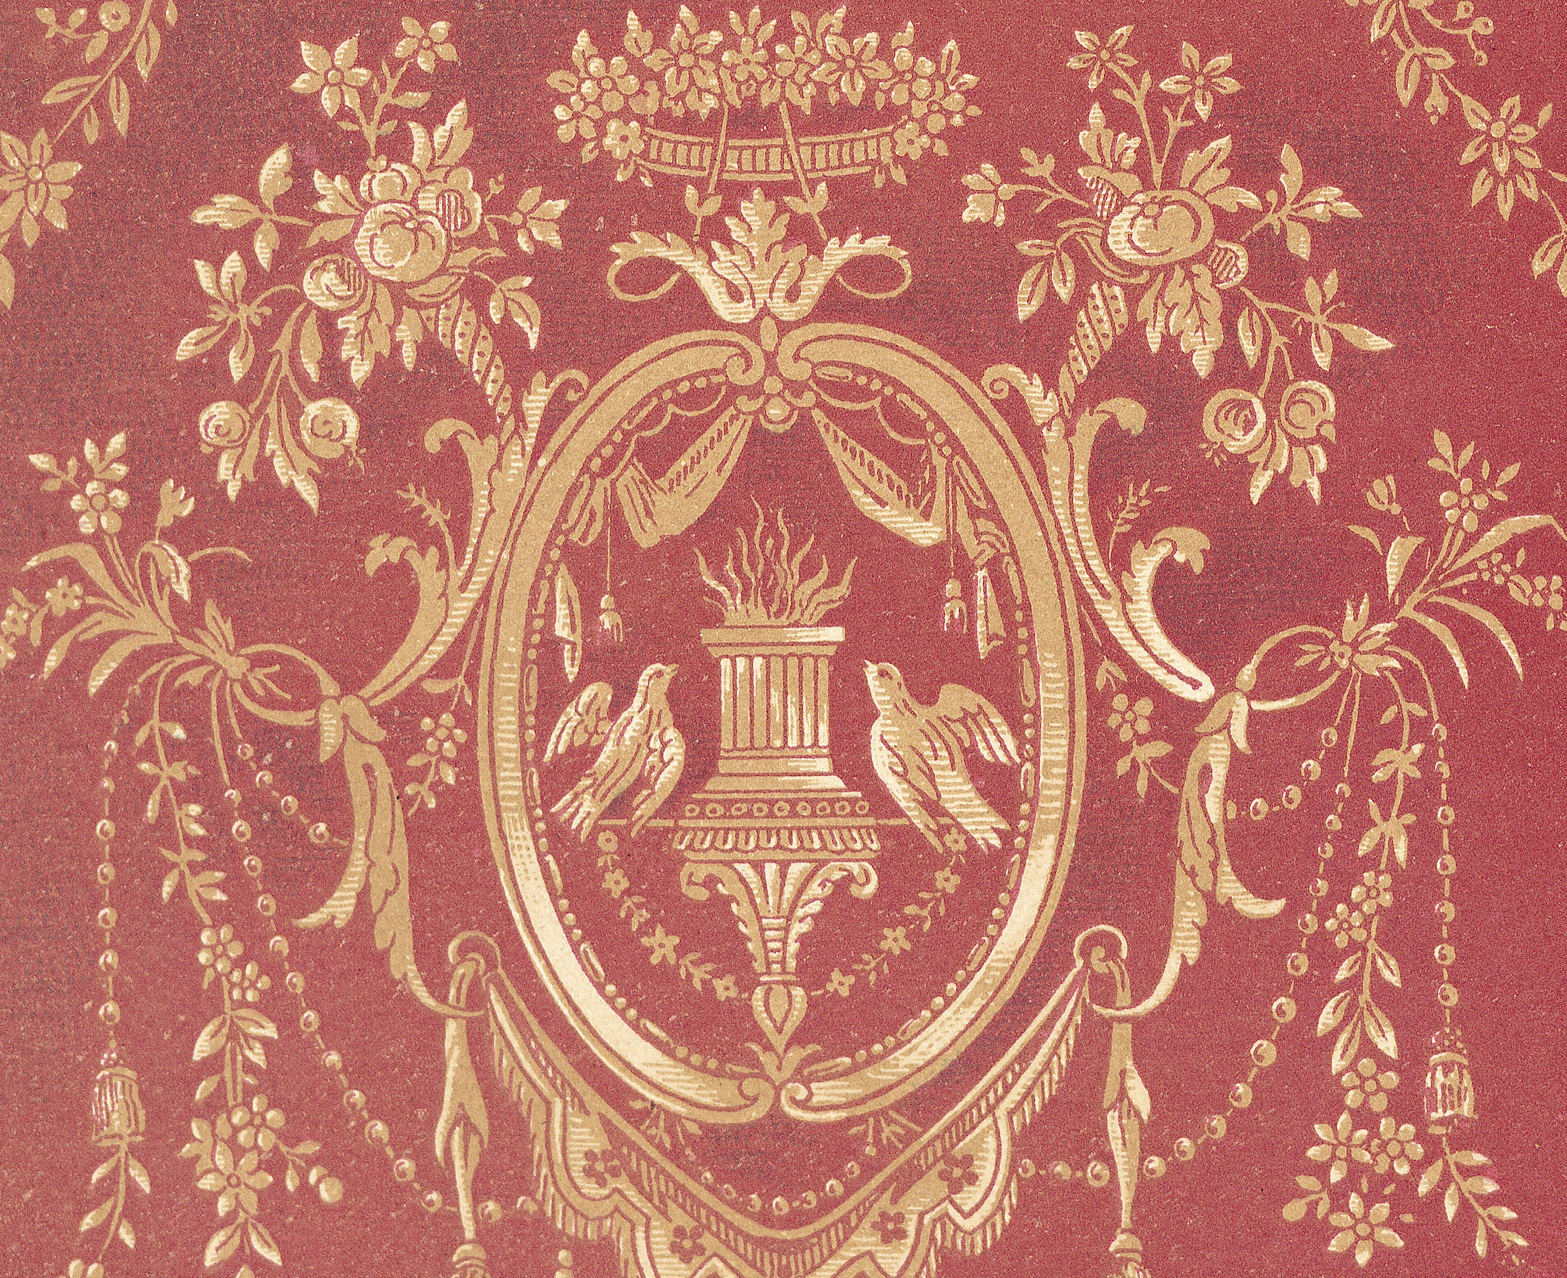 Decor Wallpaper in the 1800s 365 Days Of Century Homes